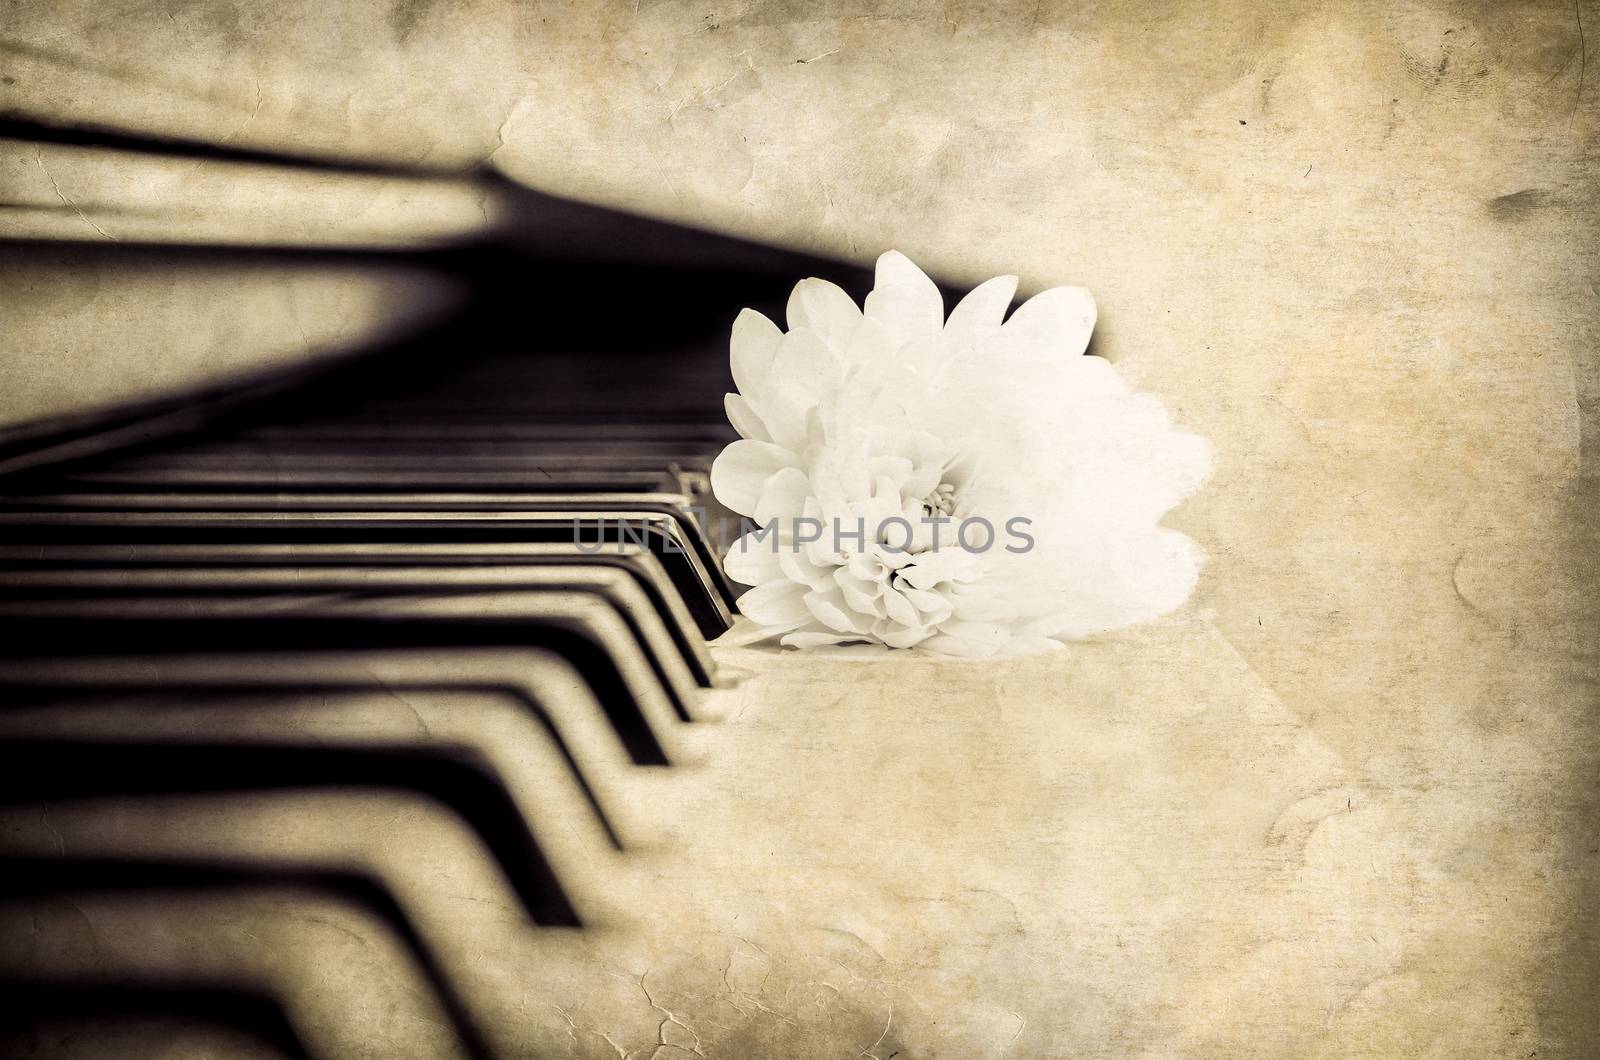 Close-up detail of piano keyboard and flower in monochrome by martinm303